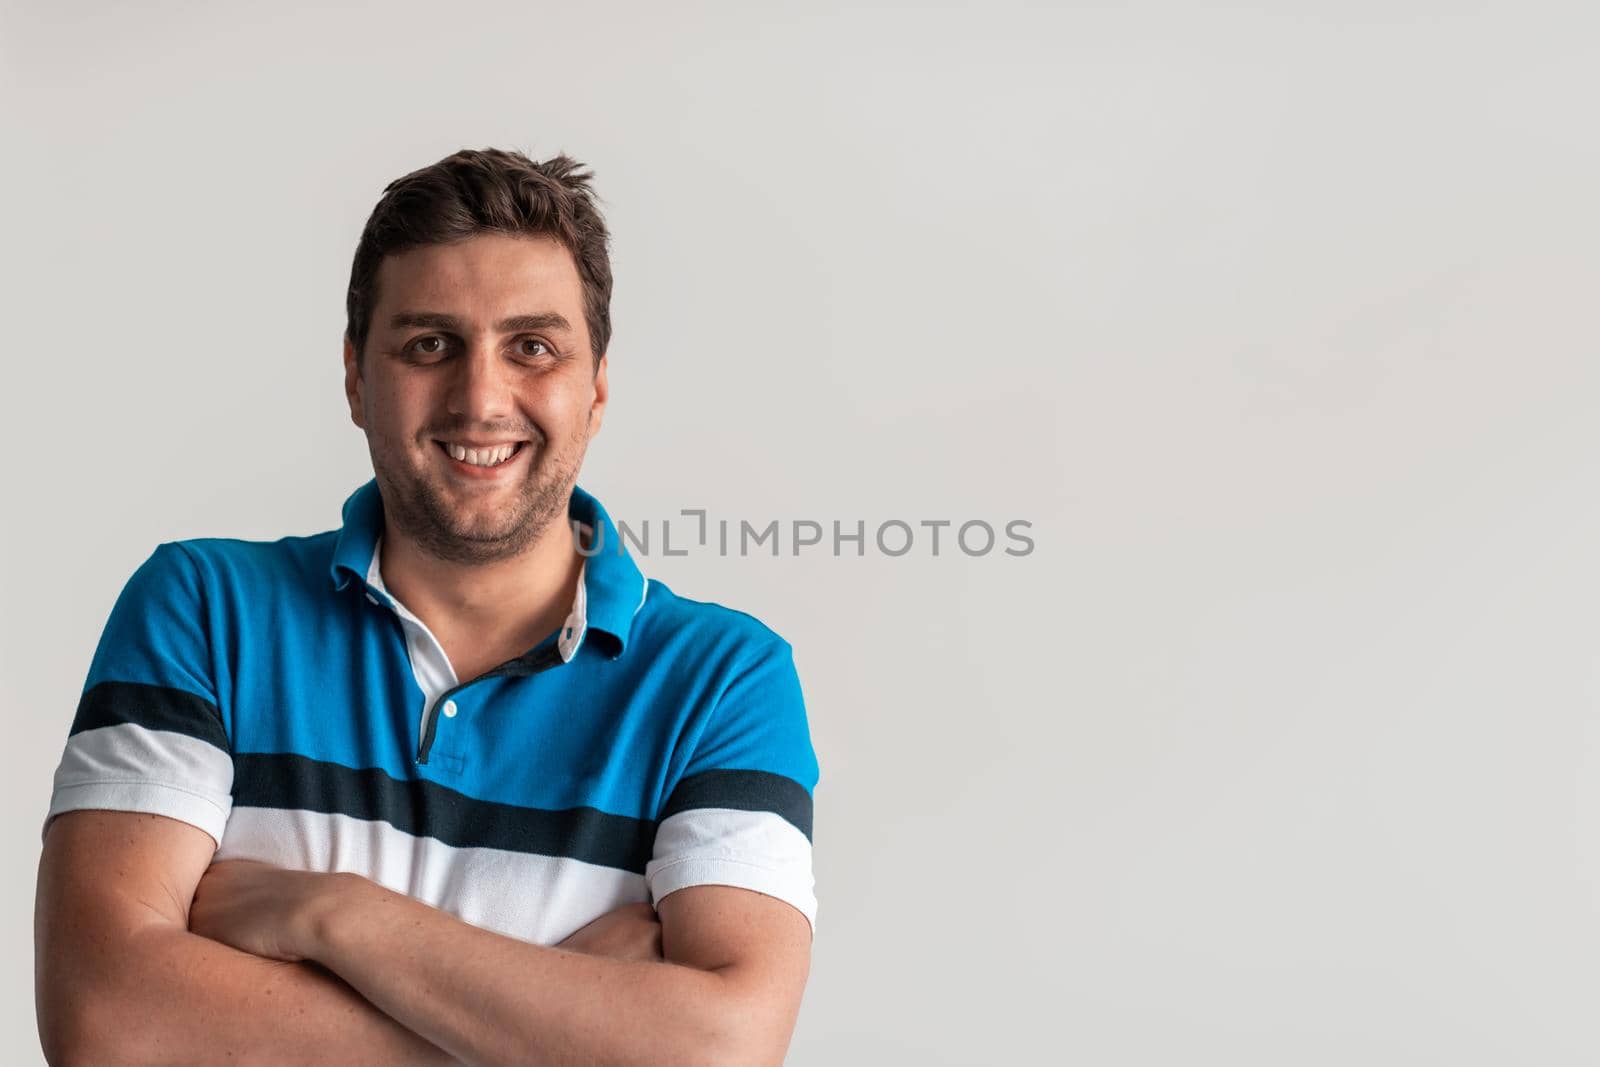 Formal business male portrait. A confident successful casual businessman or manager stands in front of a white background, arms crossed, looking directly at the camera and smiling friendly. High-quality photography.